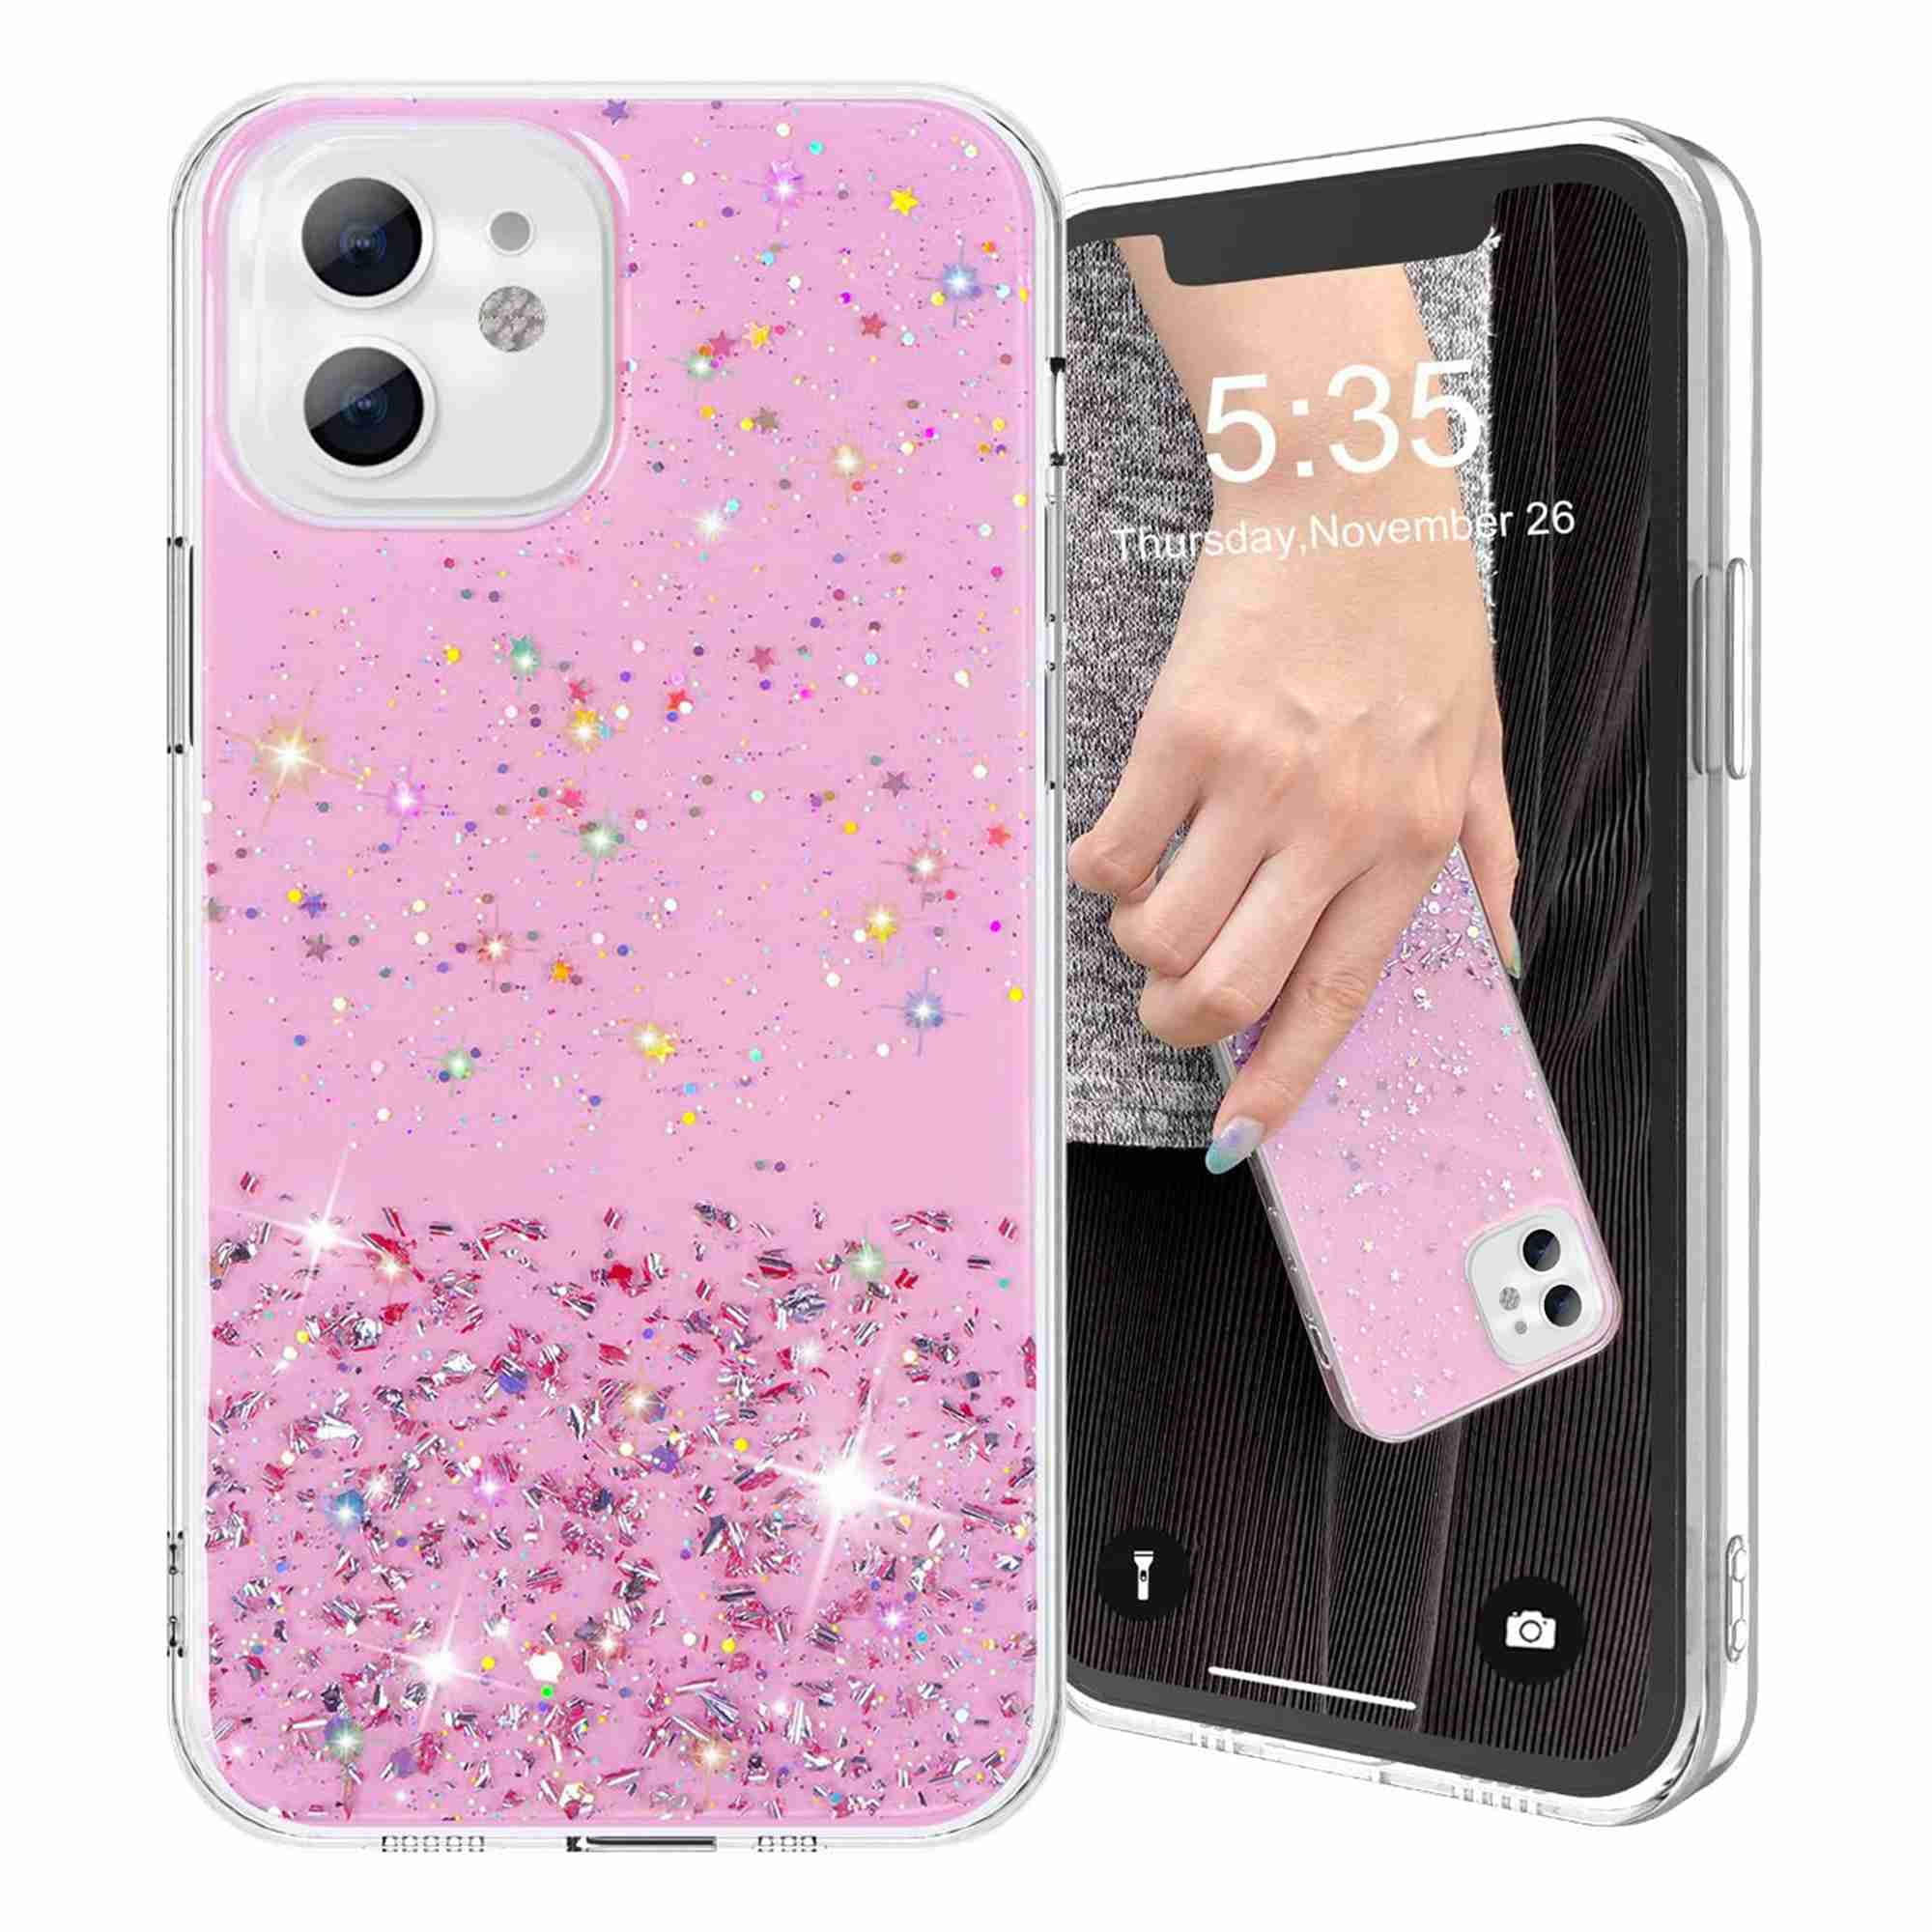 Iphone cases for girls